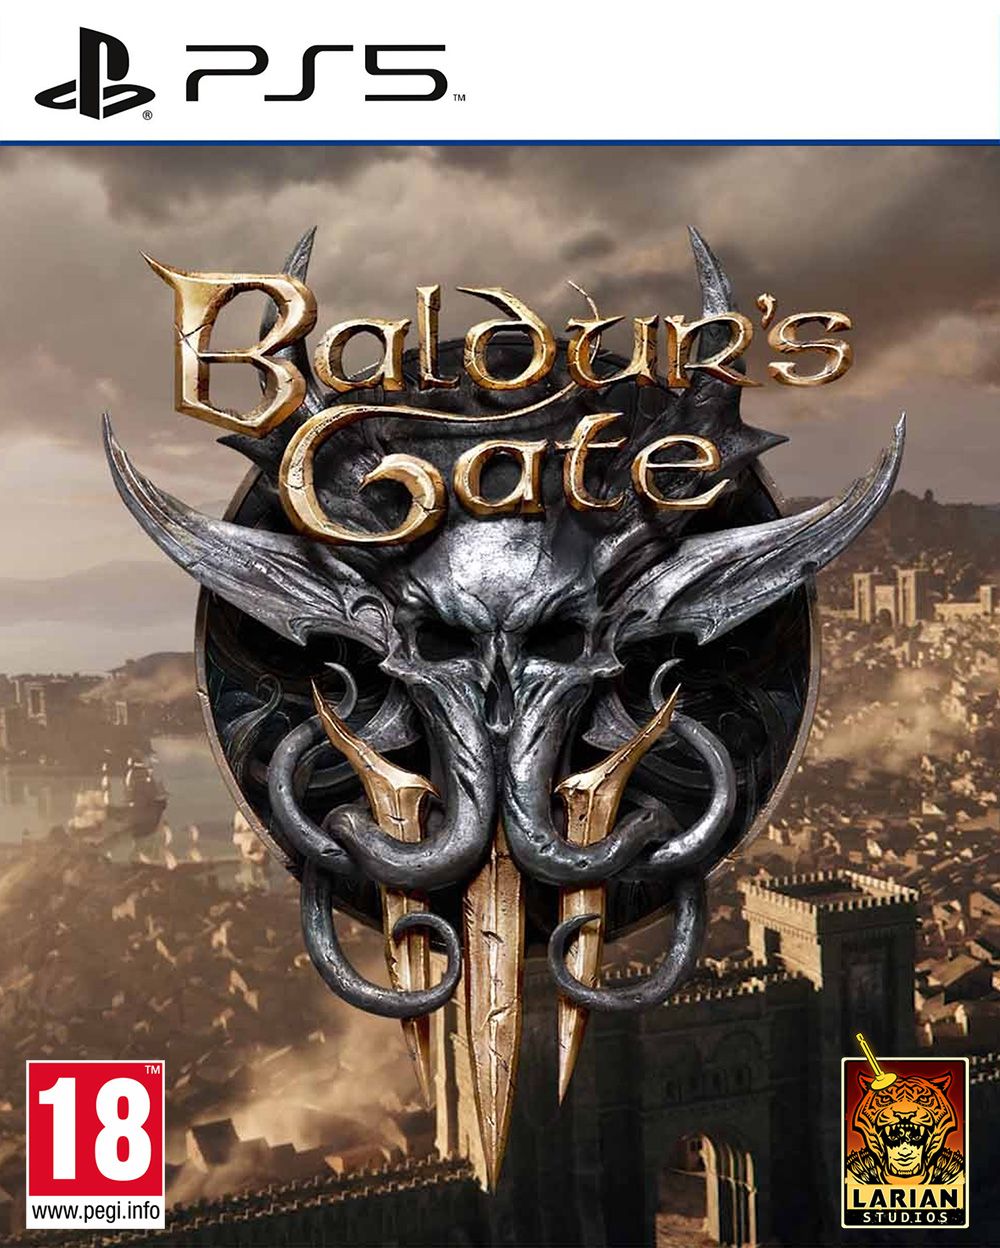 Baldur's Gate 3 (PS5)(New) | Buy from Pwned Games with confidence ...